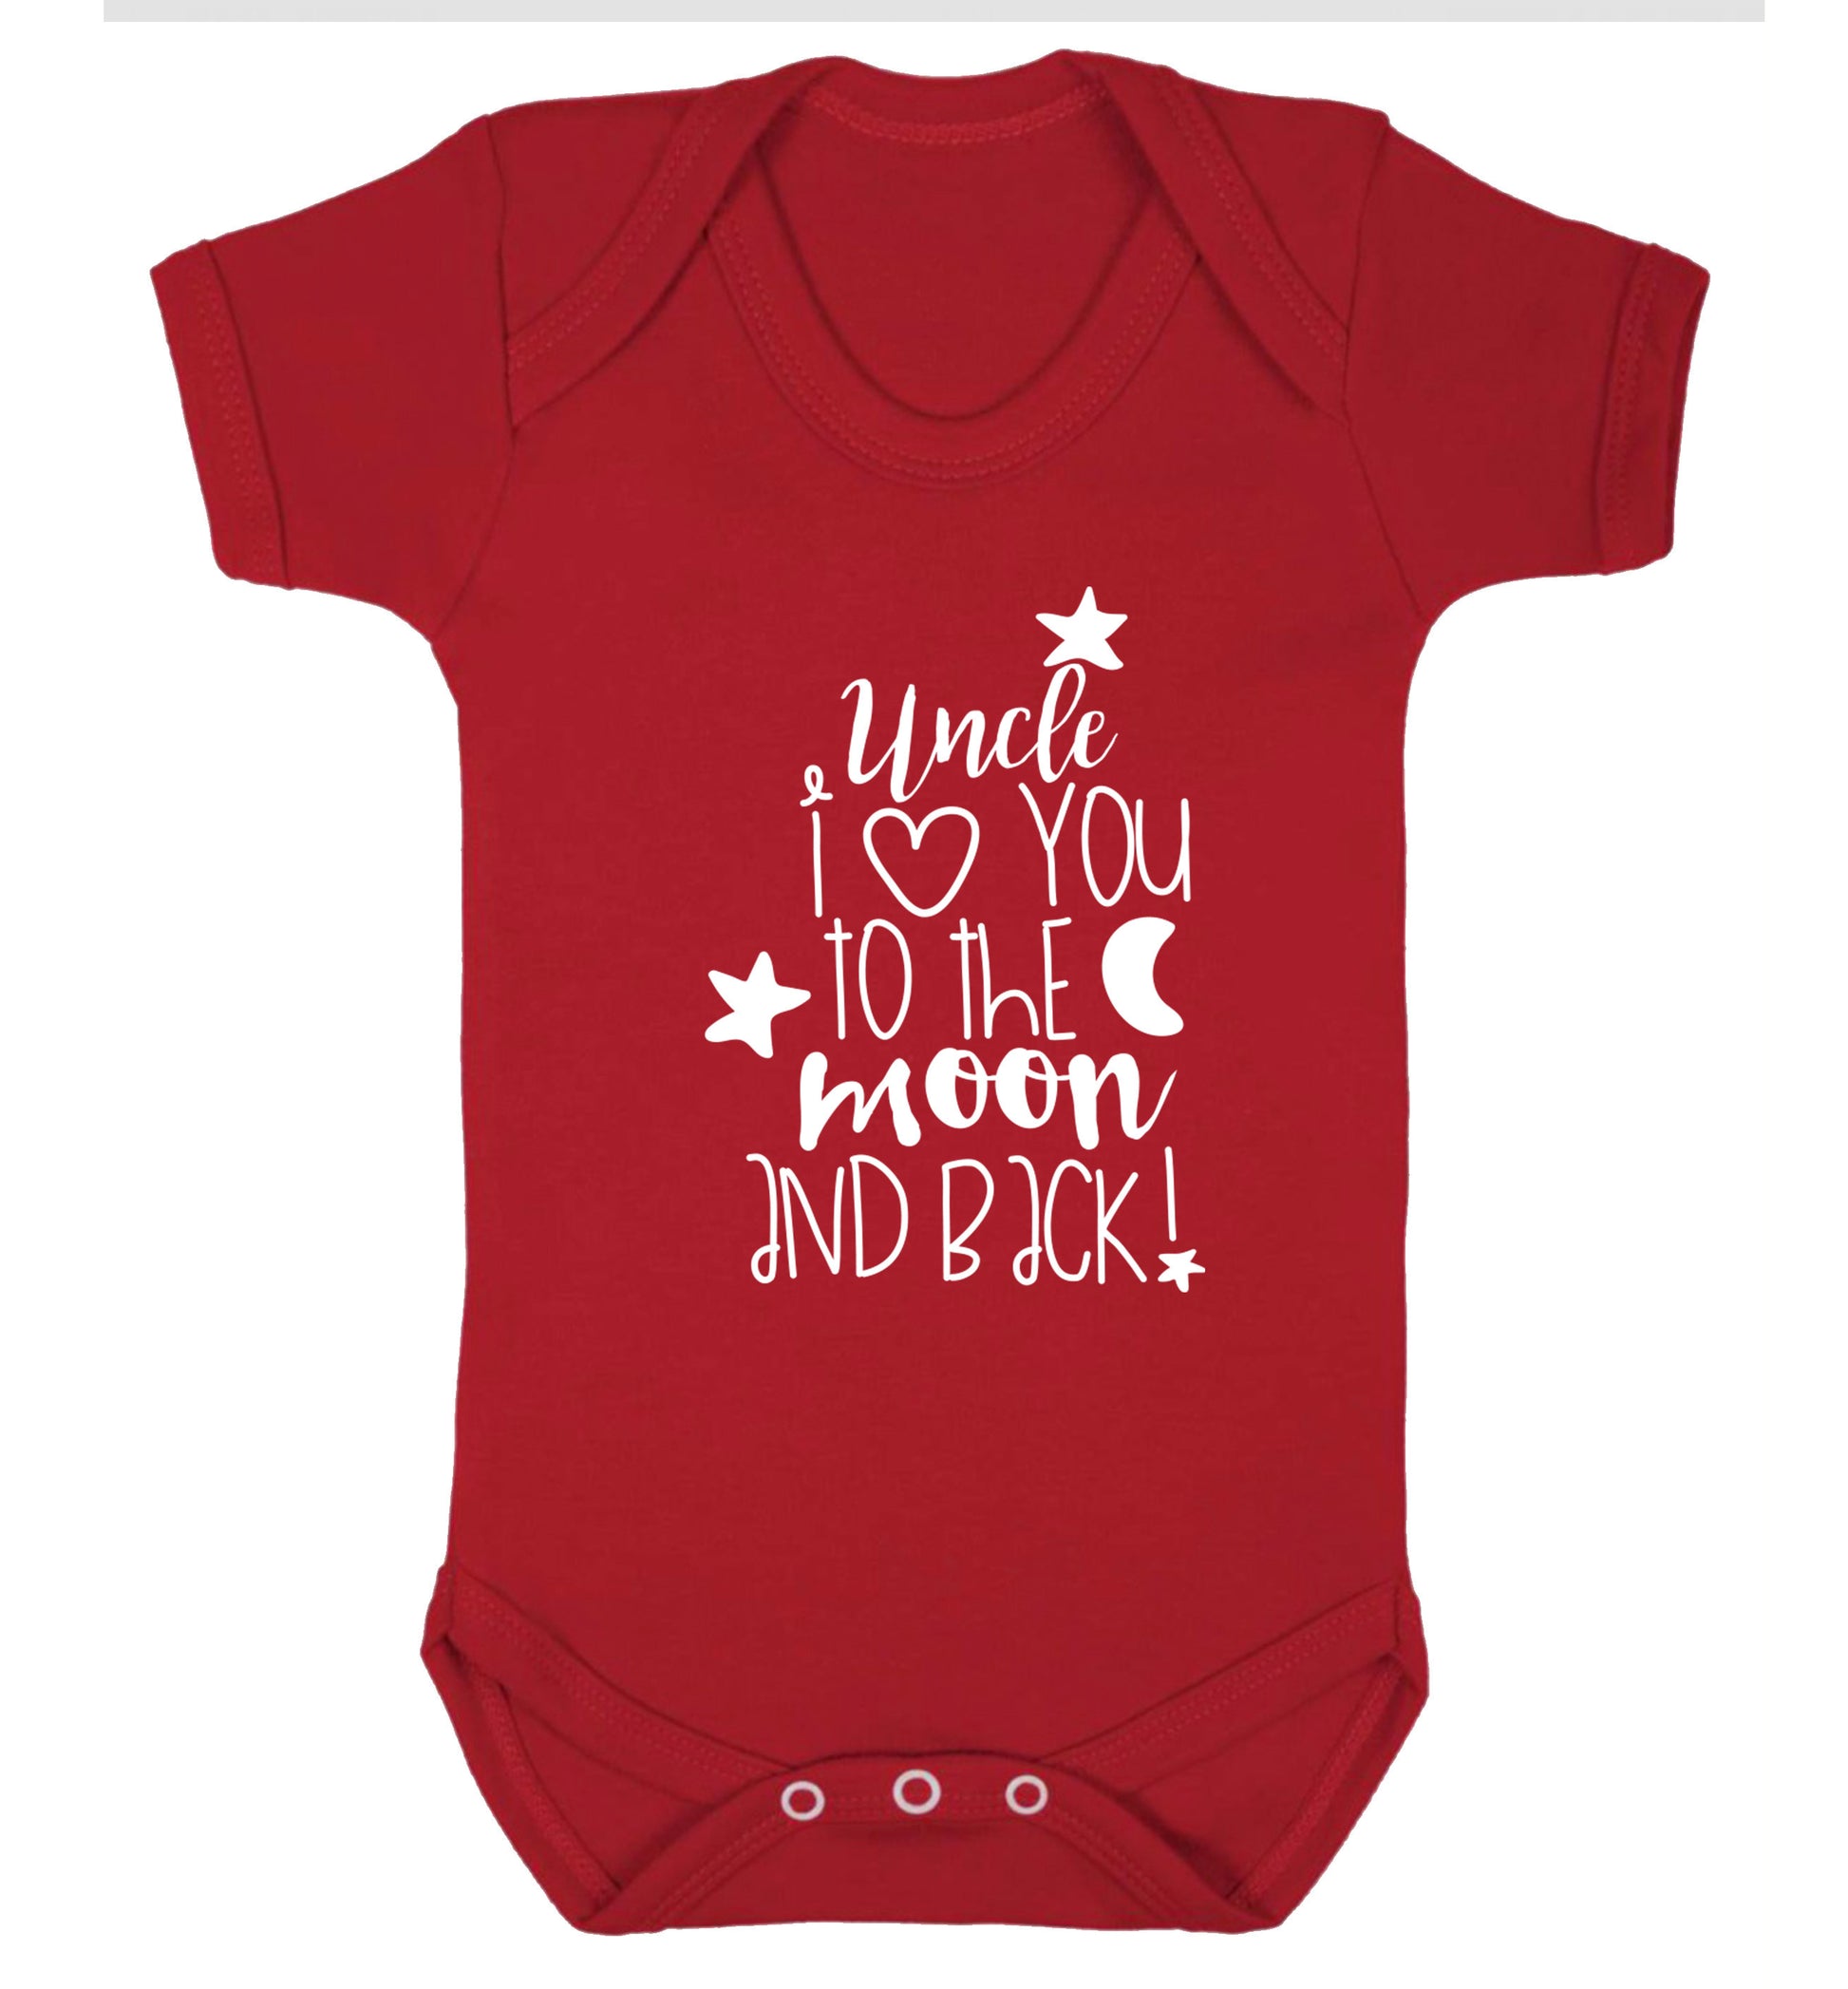 Uncle I love you to the moon and back Baby Vest red 18-24 months